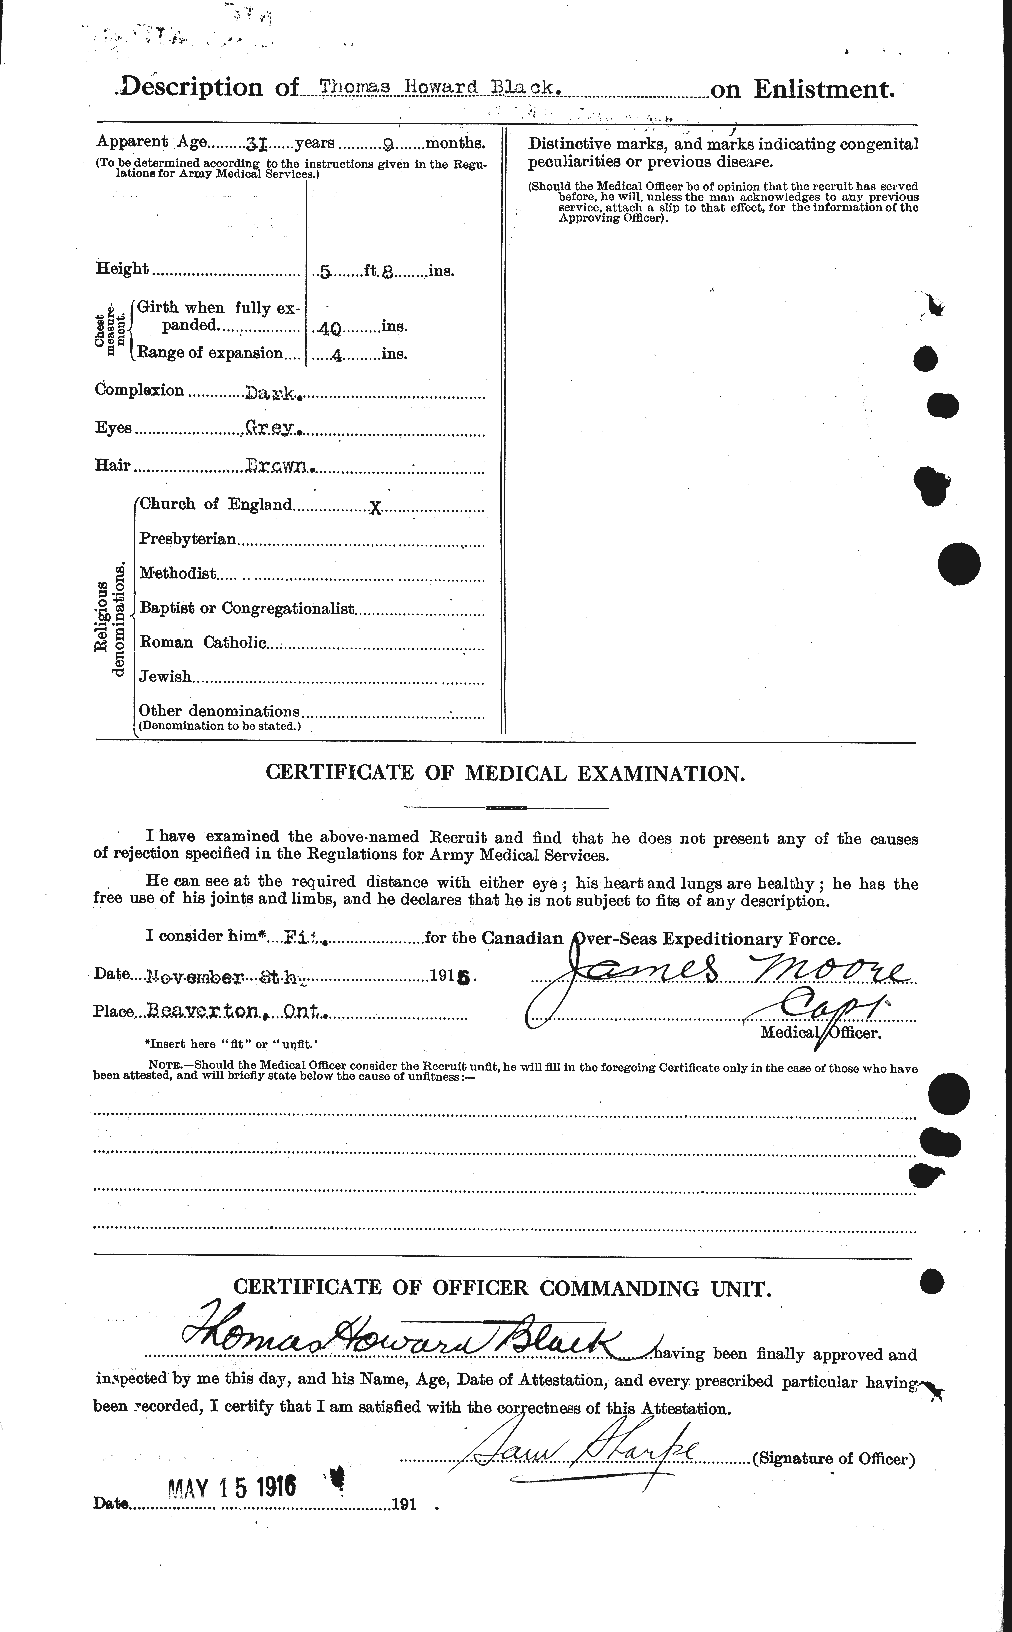 Personnel Records of the First World War - CEF 247634b